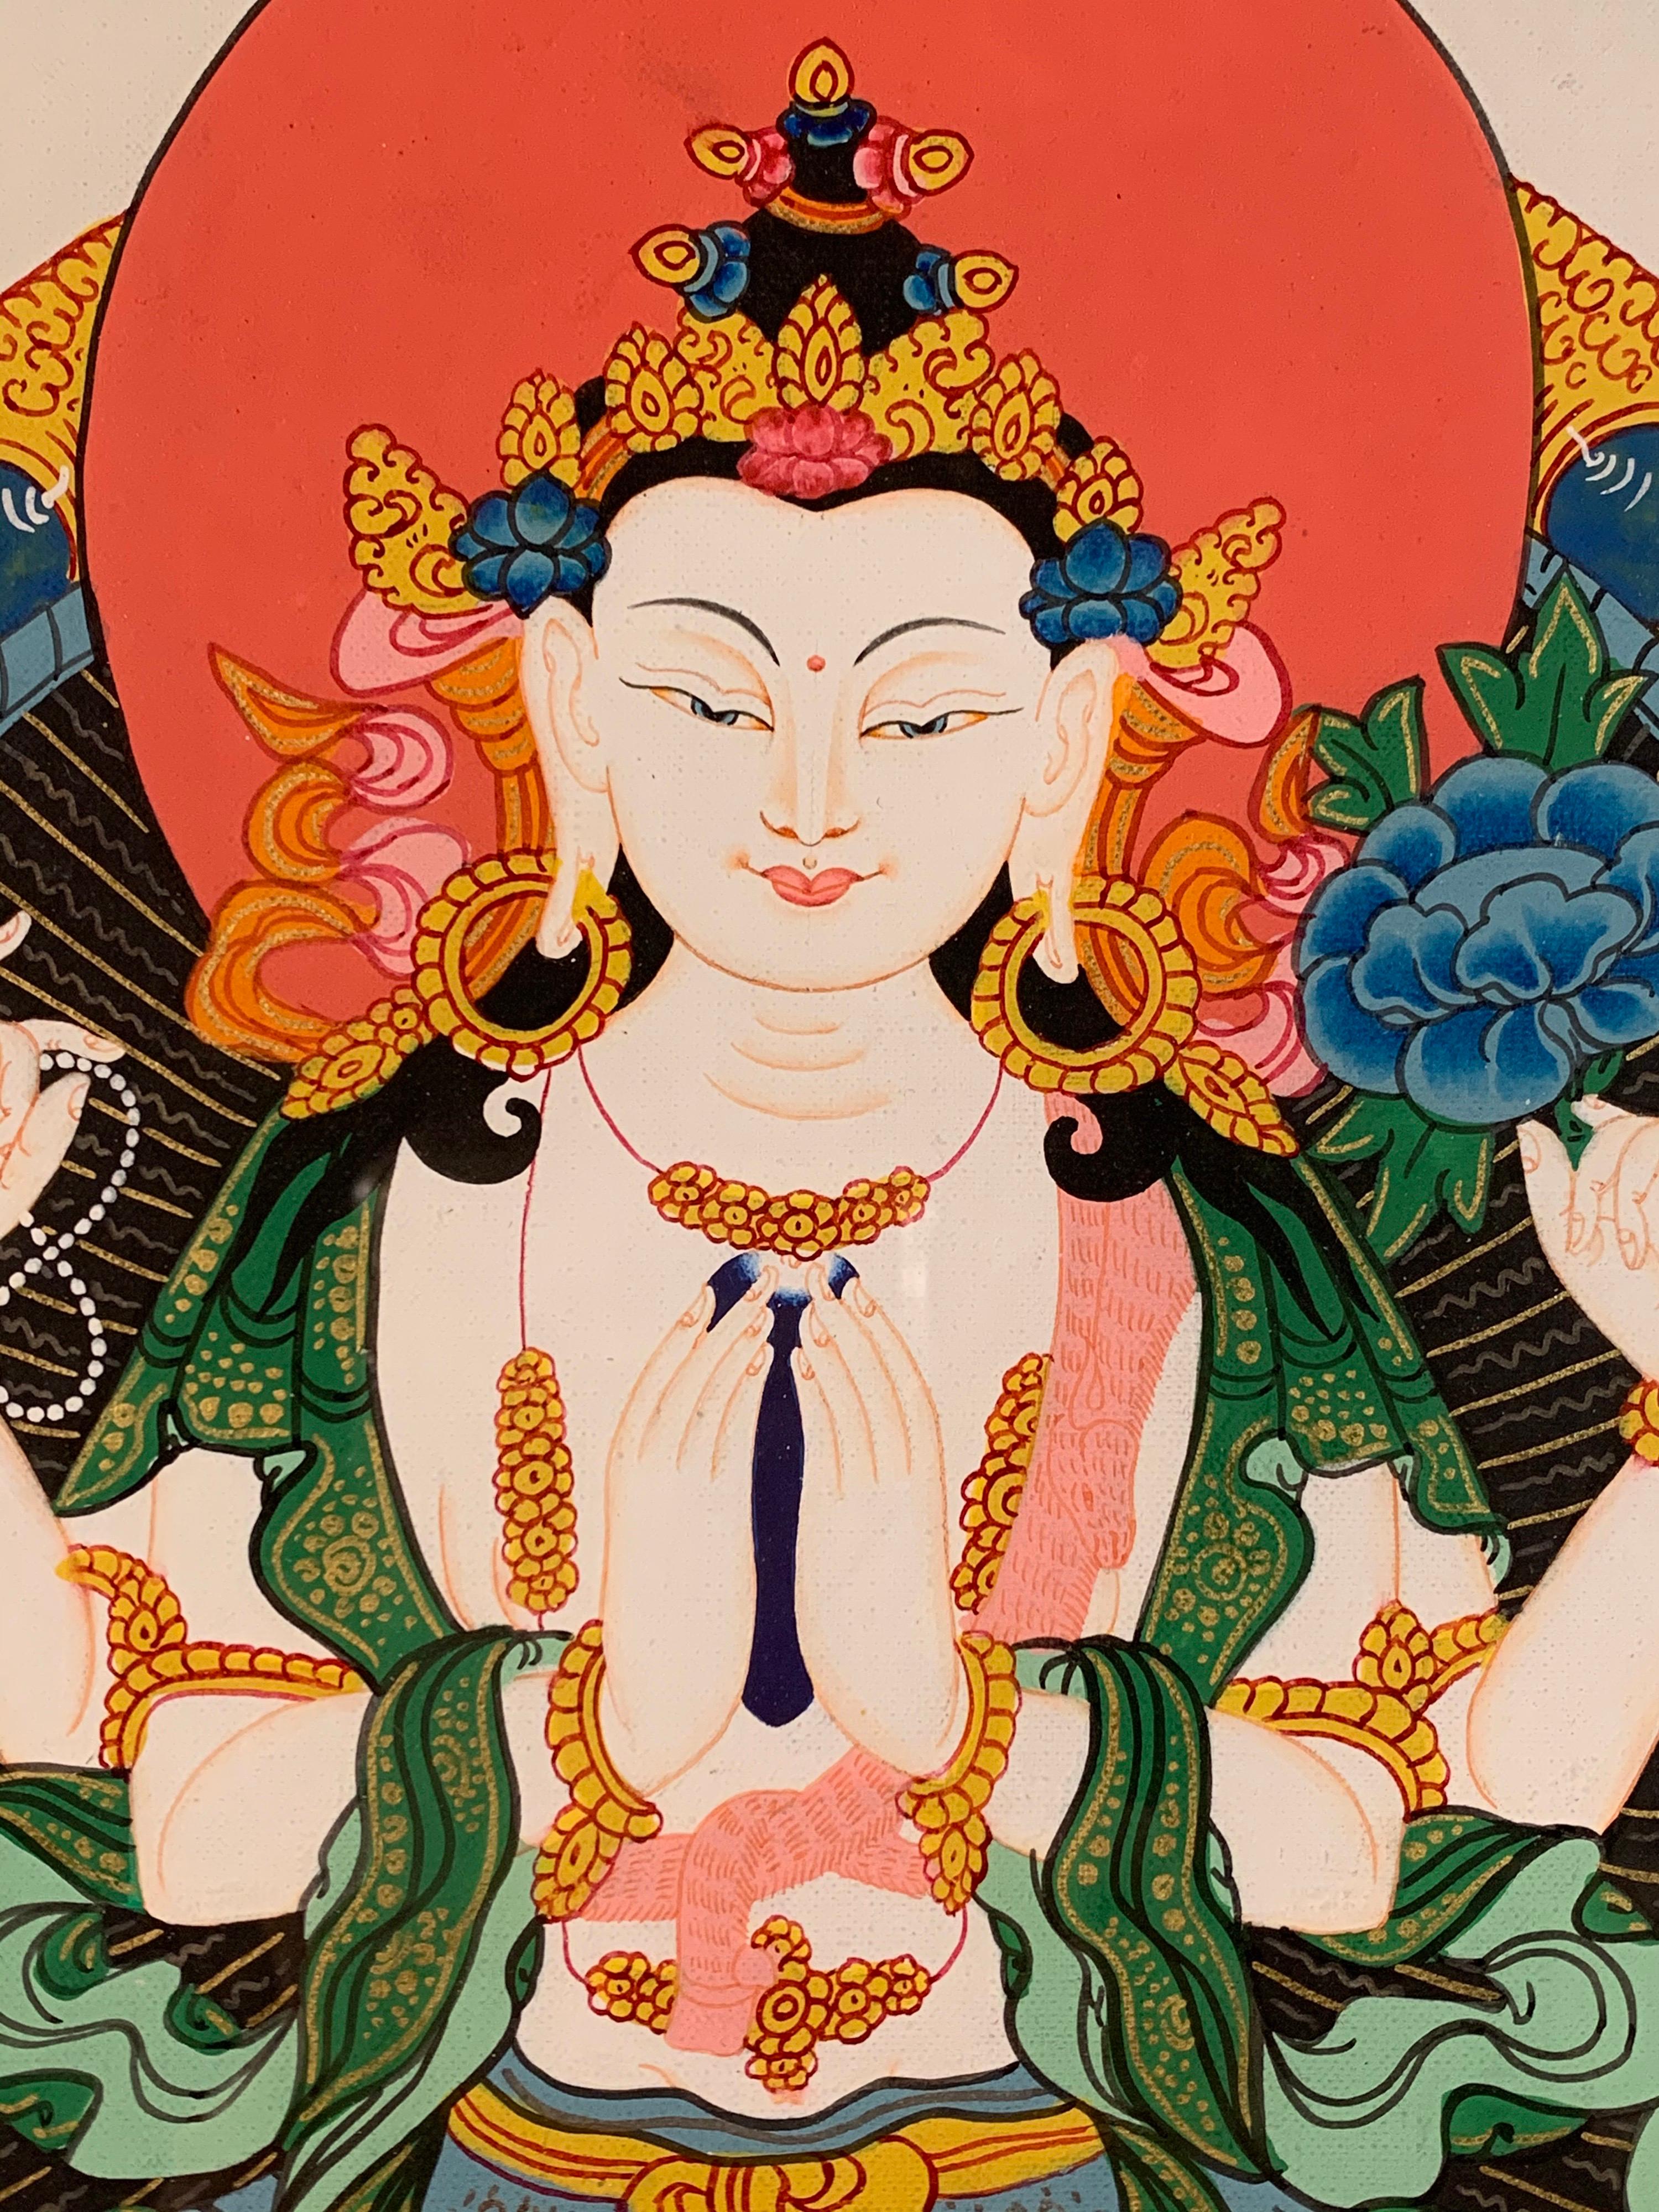 This figurative hand-painted thangka is of Chen-re-zig also known as the Buddha of Compassion. 
It is believed that Chenrezig is the embodiment of boundless loving-kindness and compassion. Every person whose heart is moved by love and compassion,